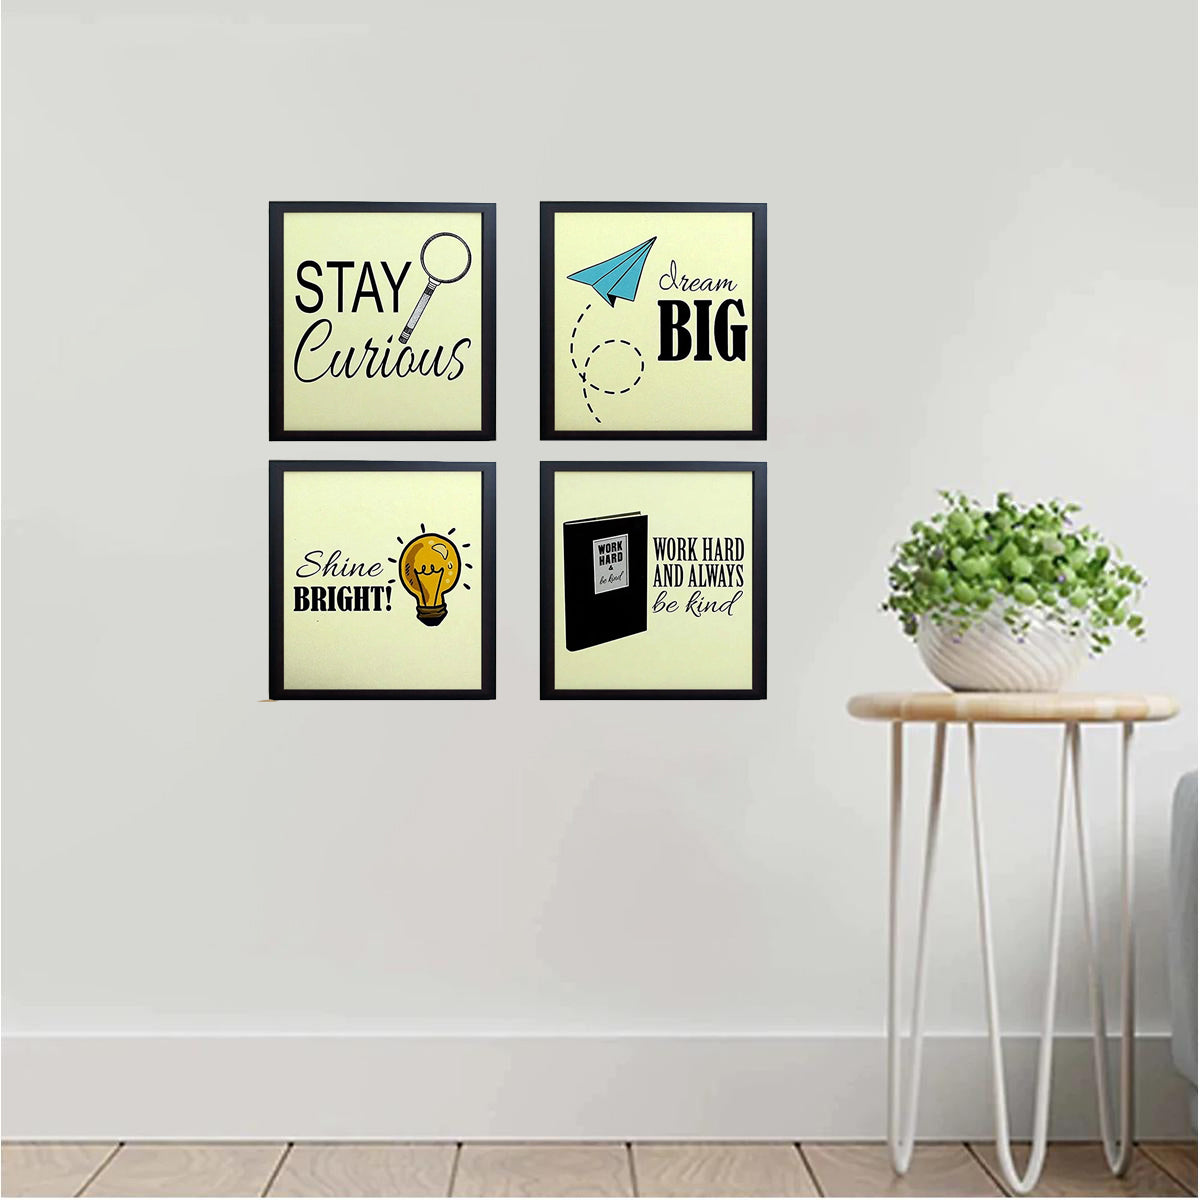 4 Pcs Office Wall Inspirational Quotes Frames set